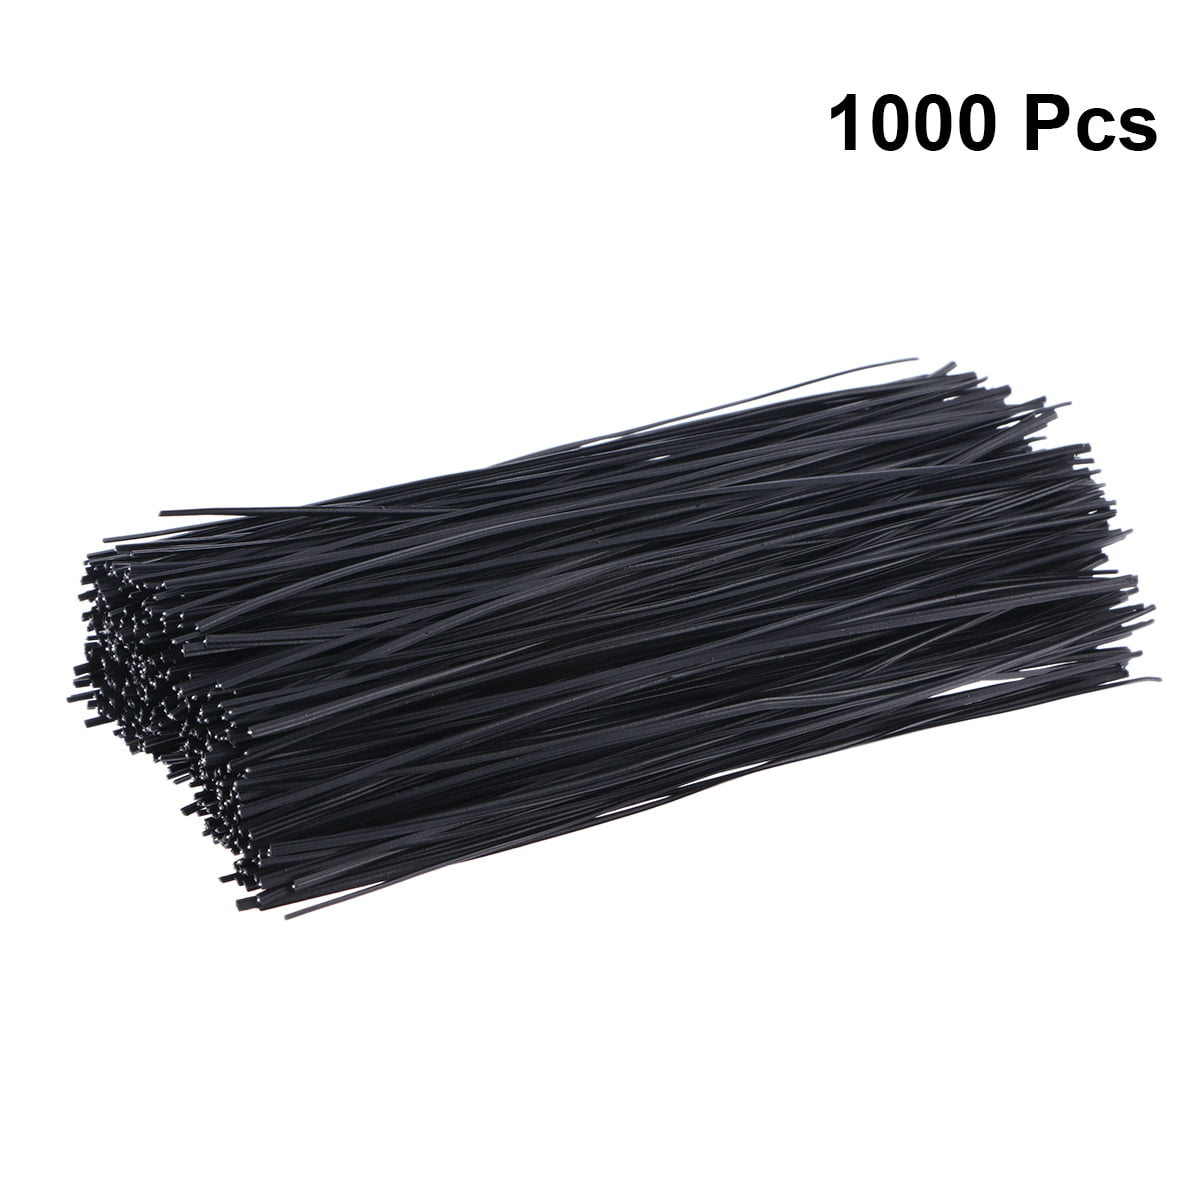 Details about   1000pcs Plastic Coated Twist Ties Twist Cord Wire Cable Wrap Ties 15CM Black 